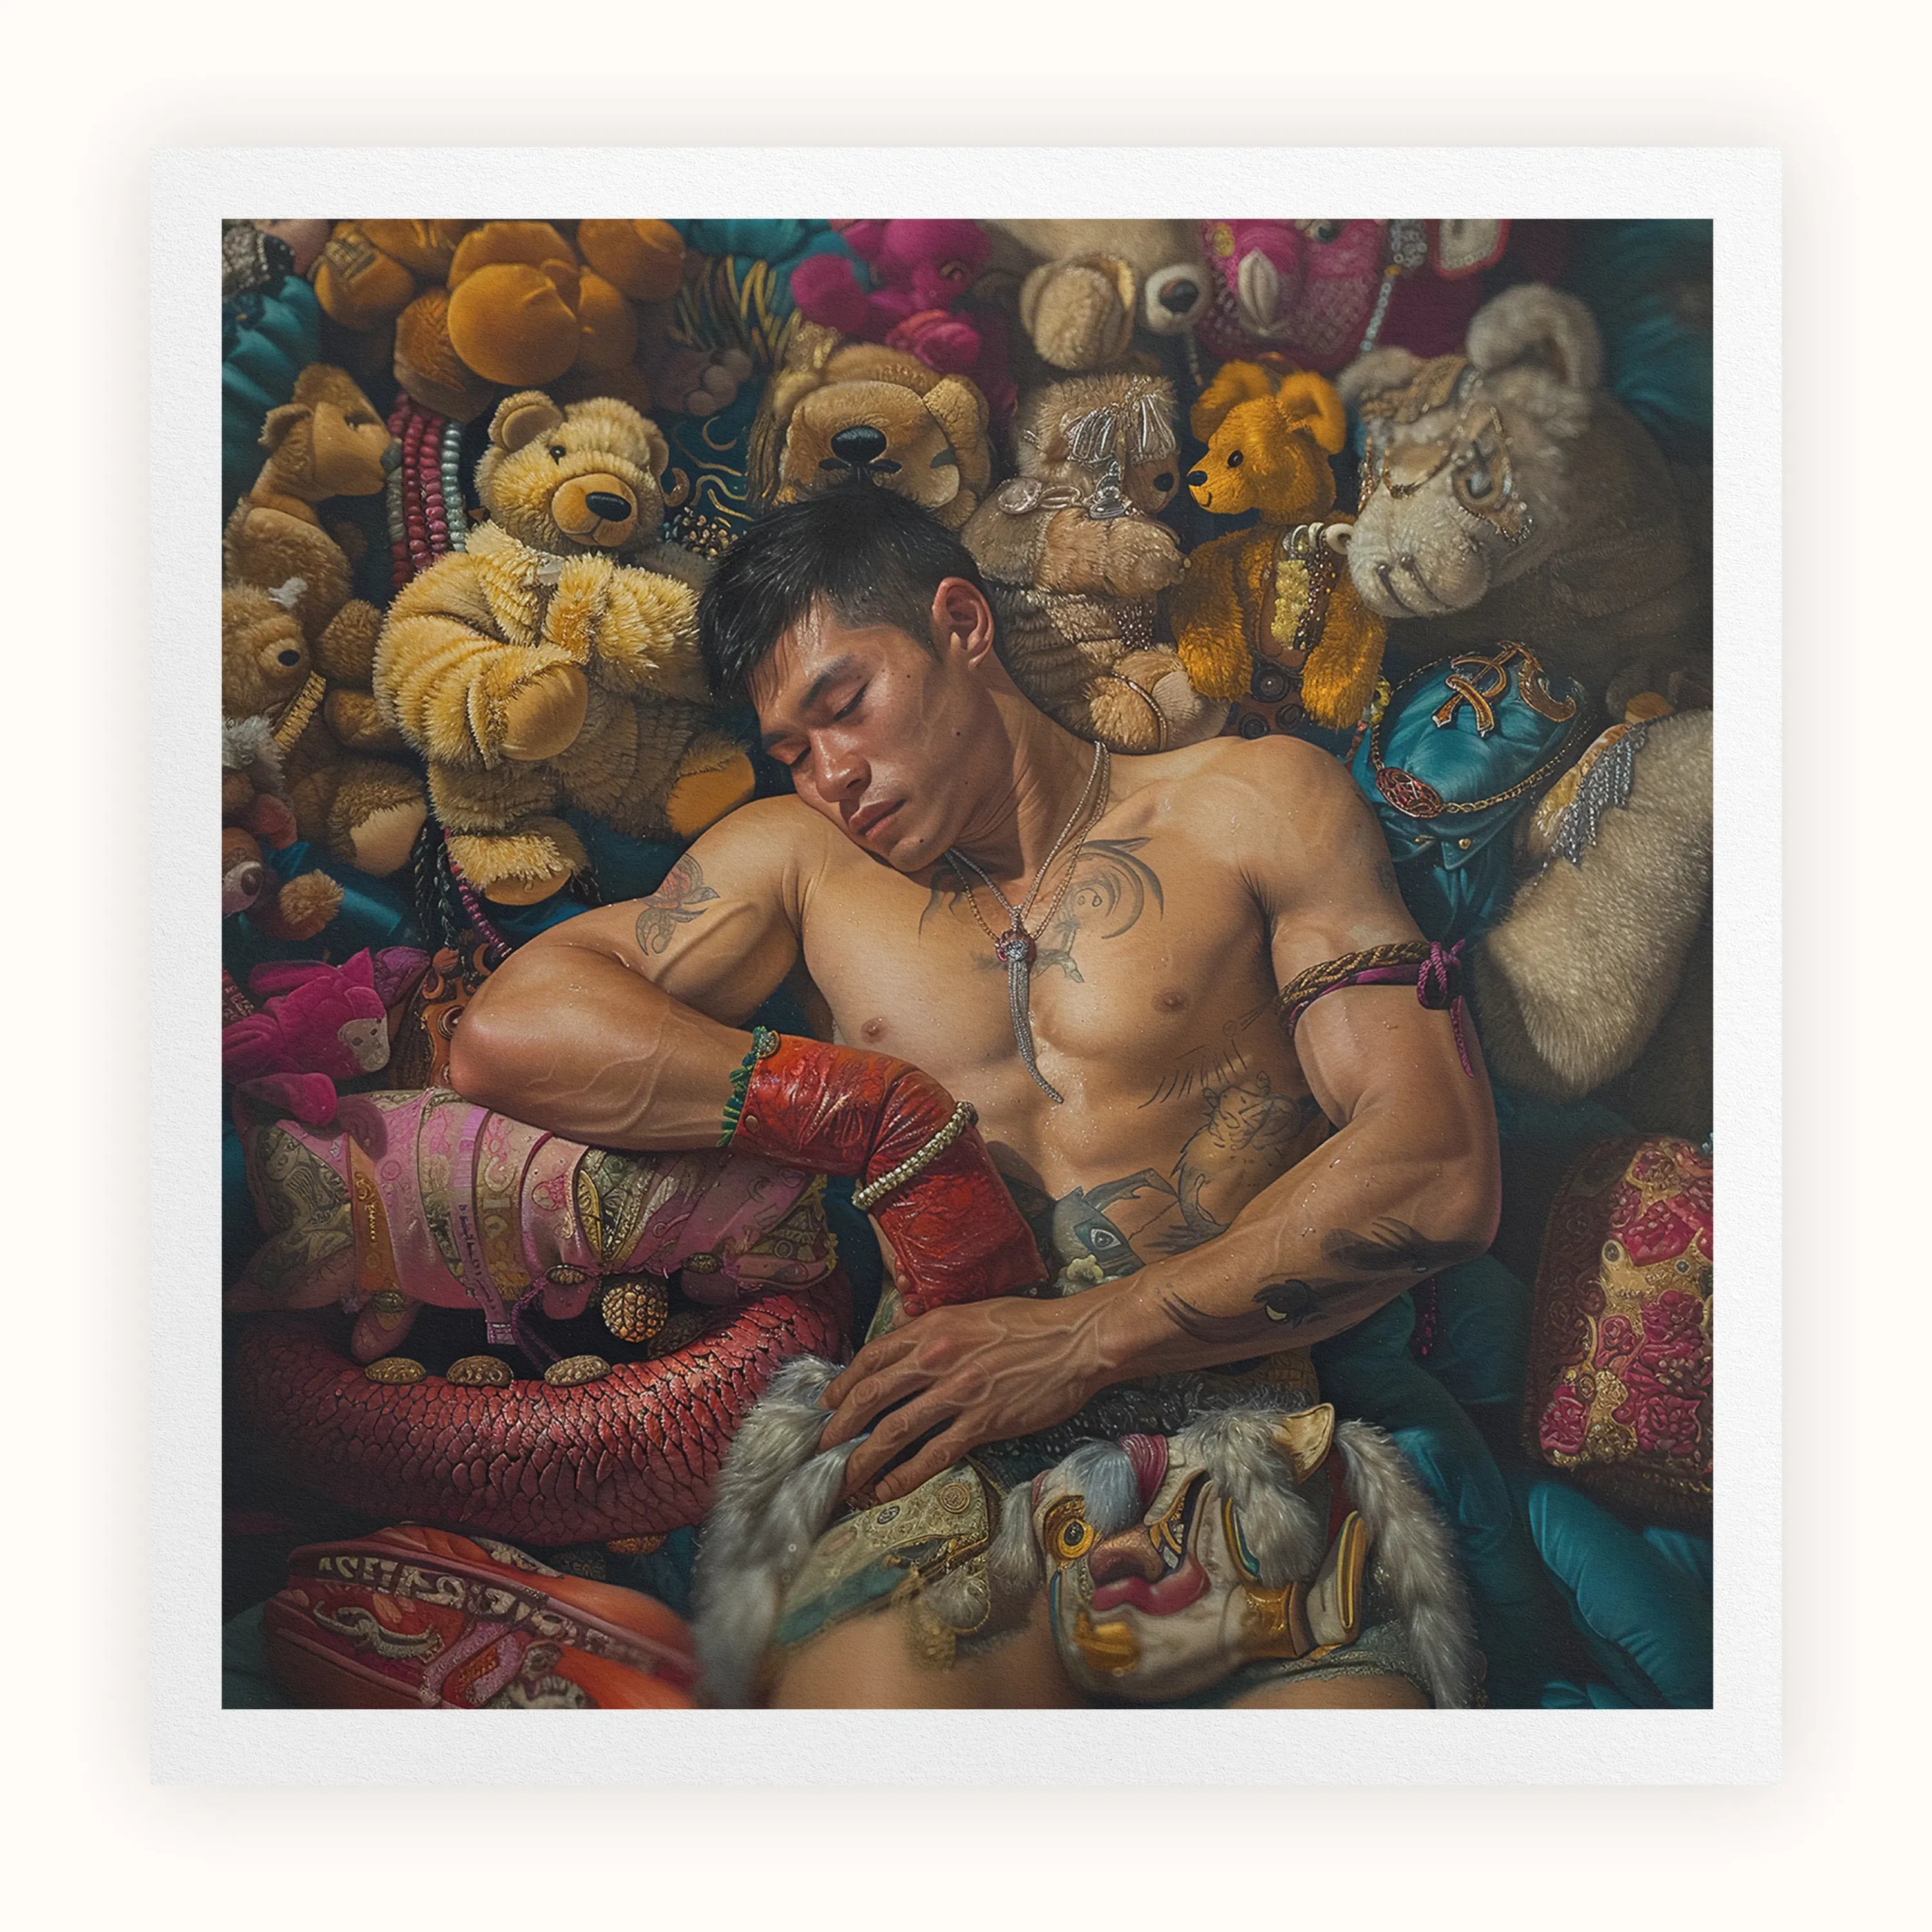 Tuckered Out - Gaysian Lowbrow Homoerotic Queerart Print - Posters Prints & Visual Artwork - Aesthetic Art